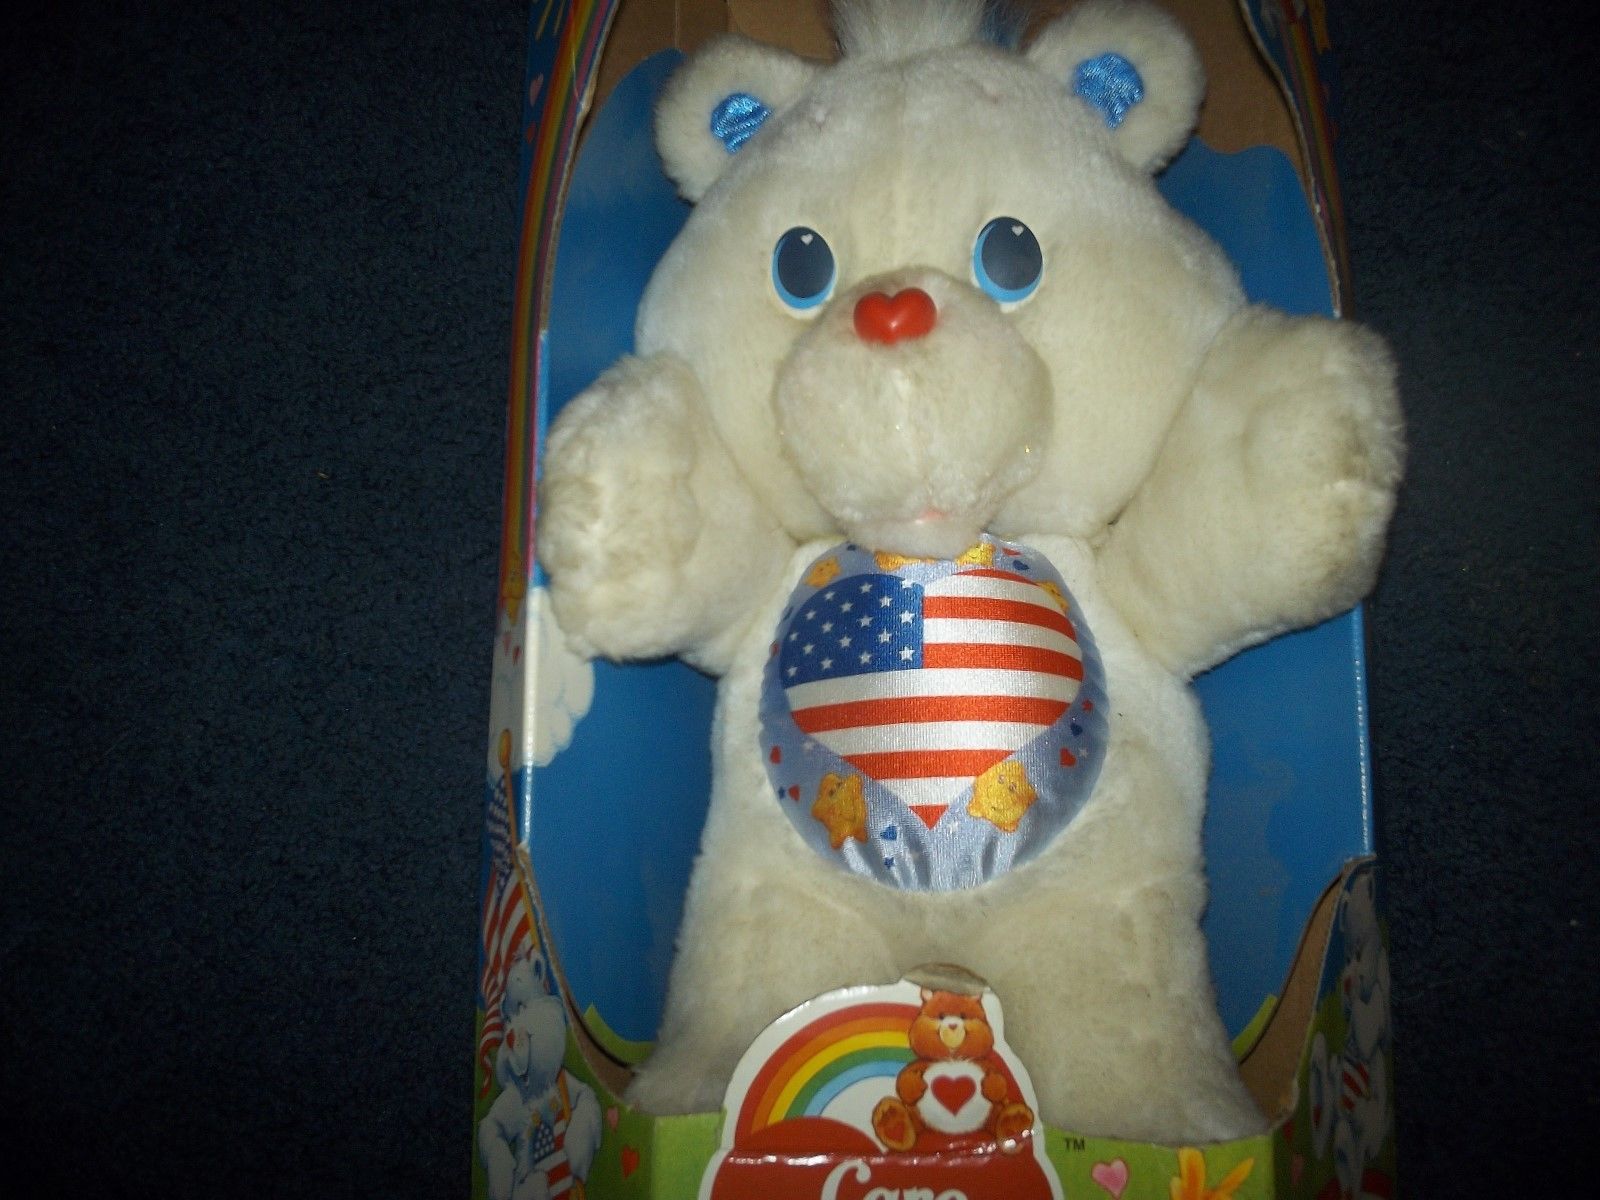 1991 Patriotic * PROUD HEART CARE BEAR Plush NEW IN BOX American Flag VINTAGE